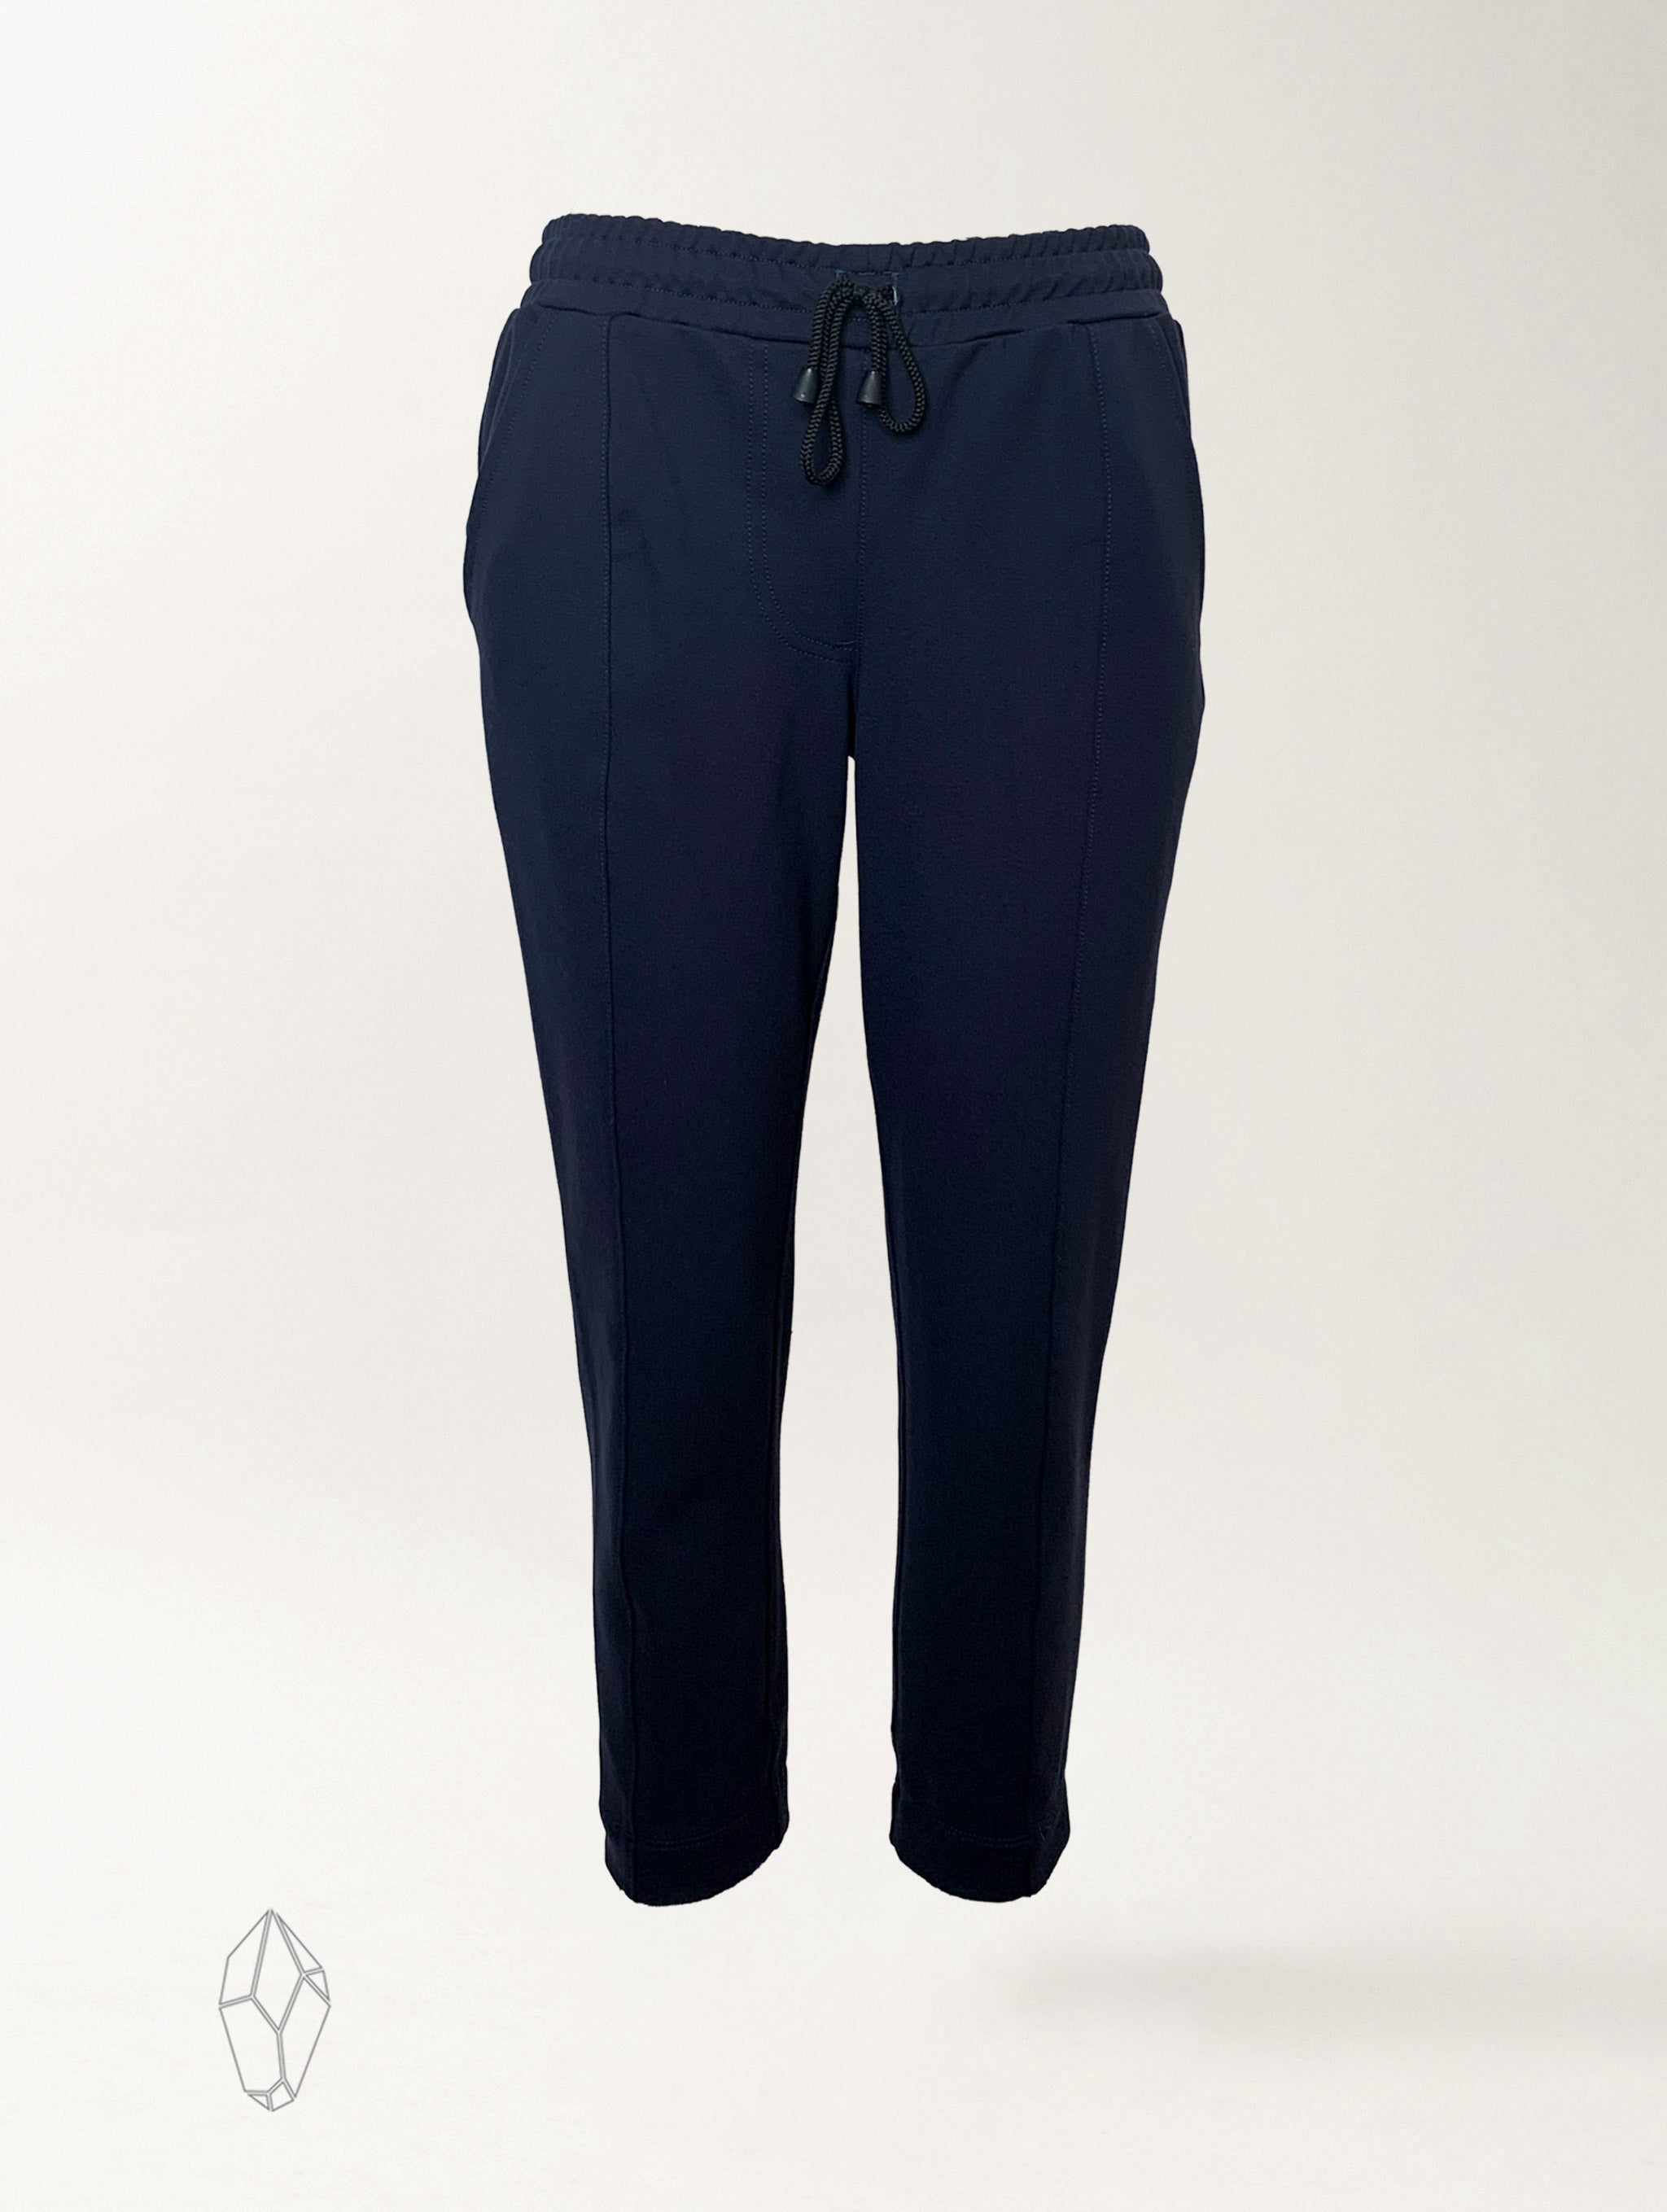 Brooklyn Pant - Midnight Double Knit